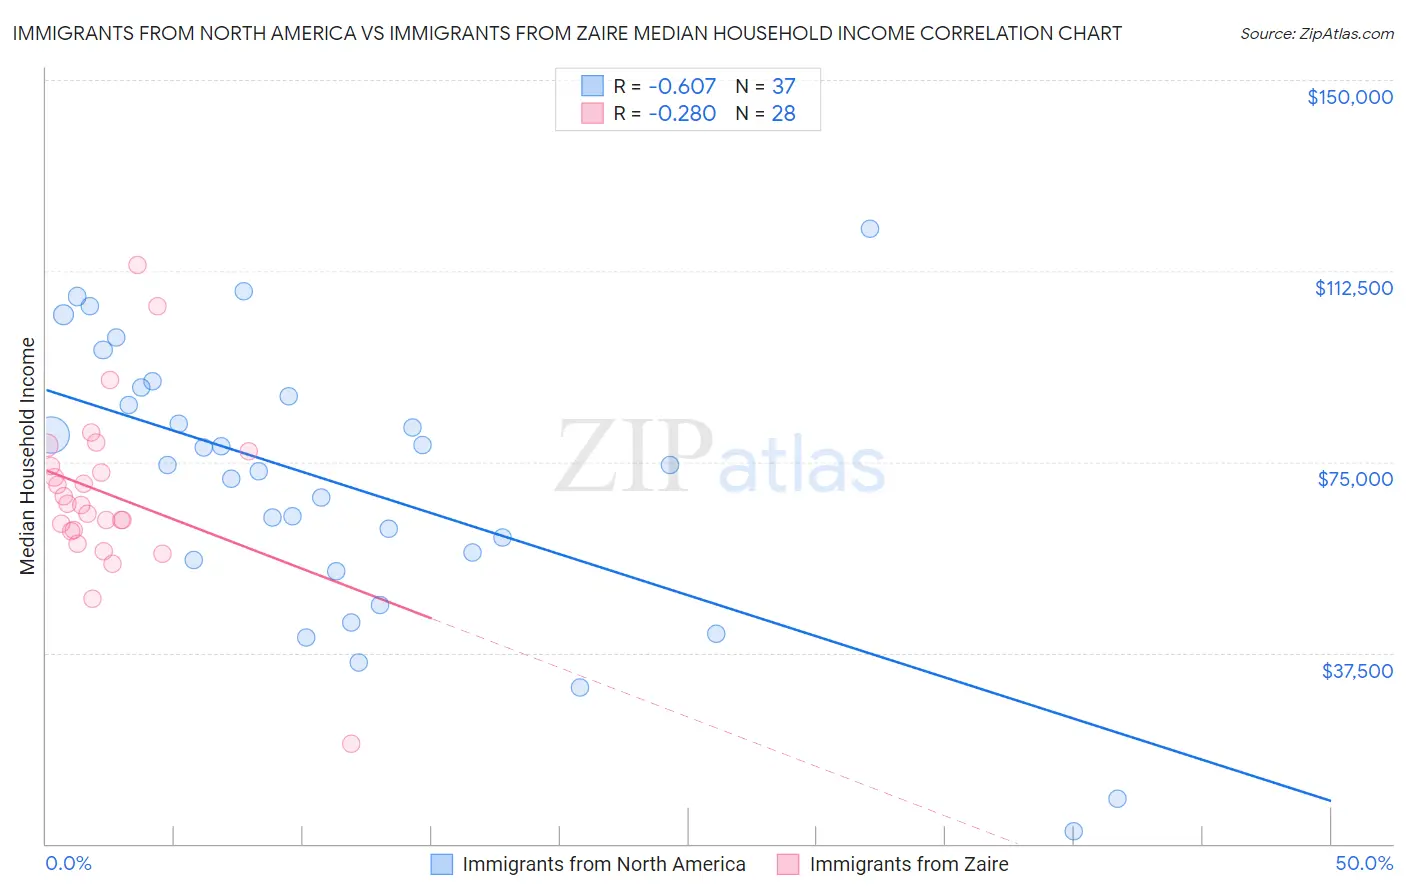 Immigrants from North America vs Immigrants from Zaire Median Household Income